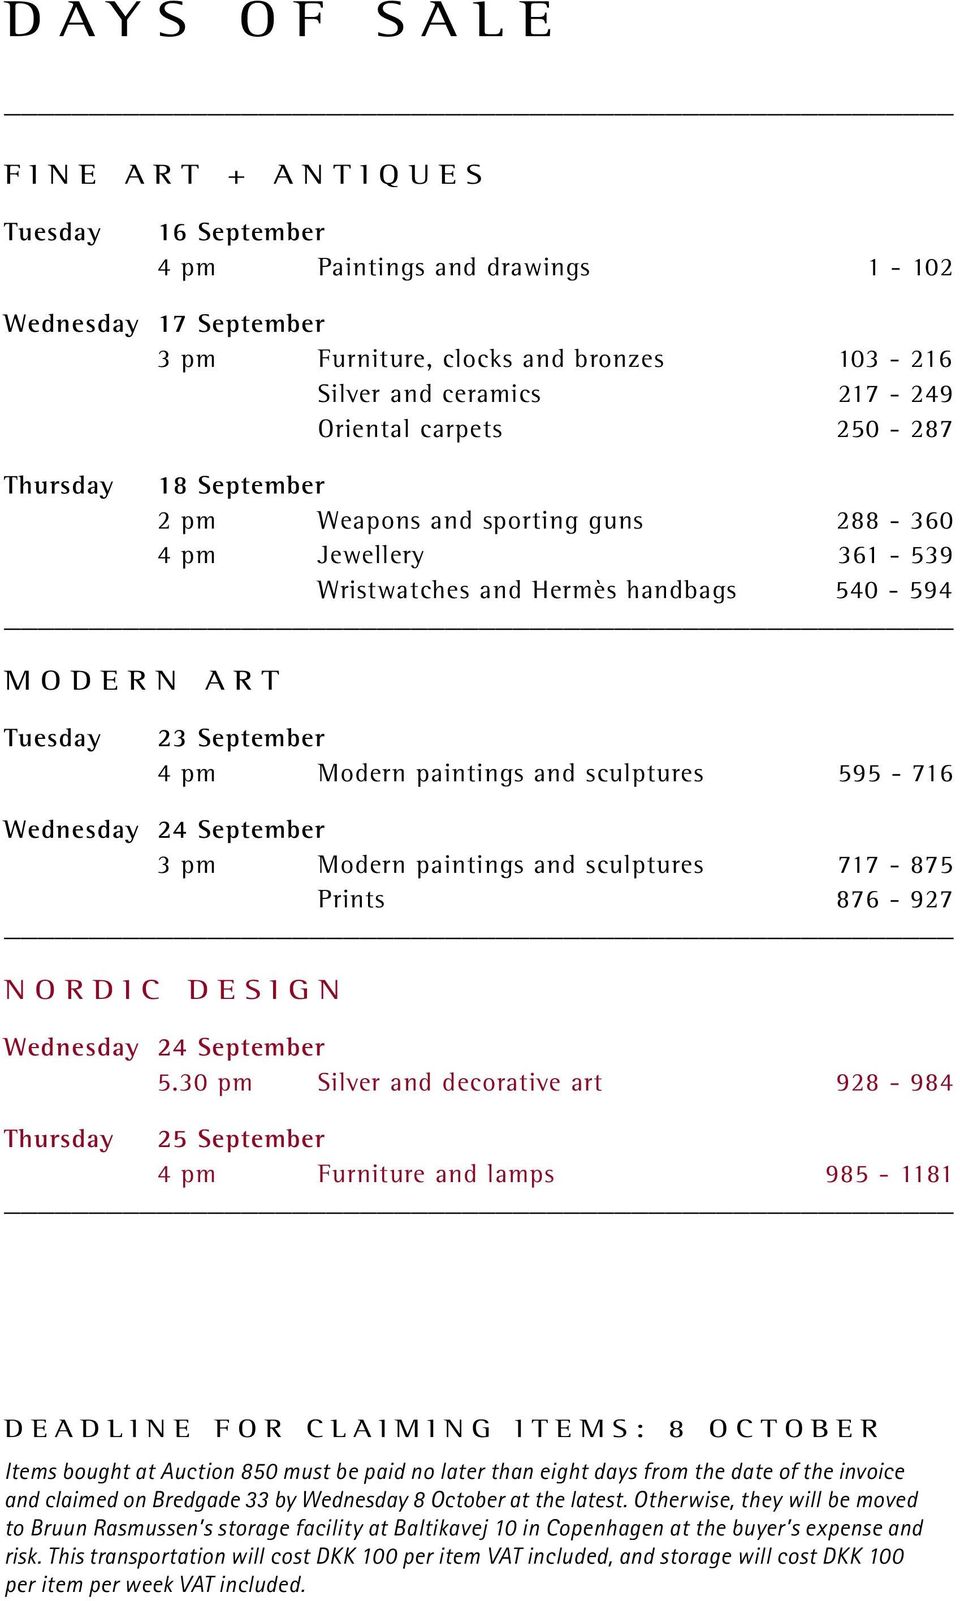 sculptures 595-716 Wednesday 24 September 3 pm Modern paintings and sculptures 717-875 Prints 876-927 NORDIC DESIGN Wednesday 24 September 5.